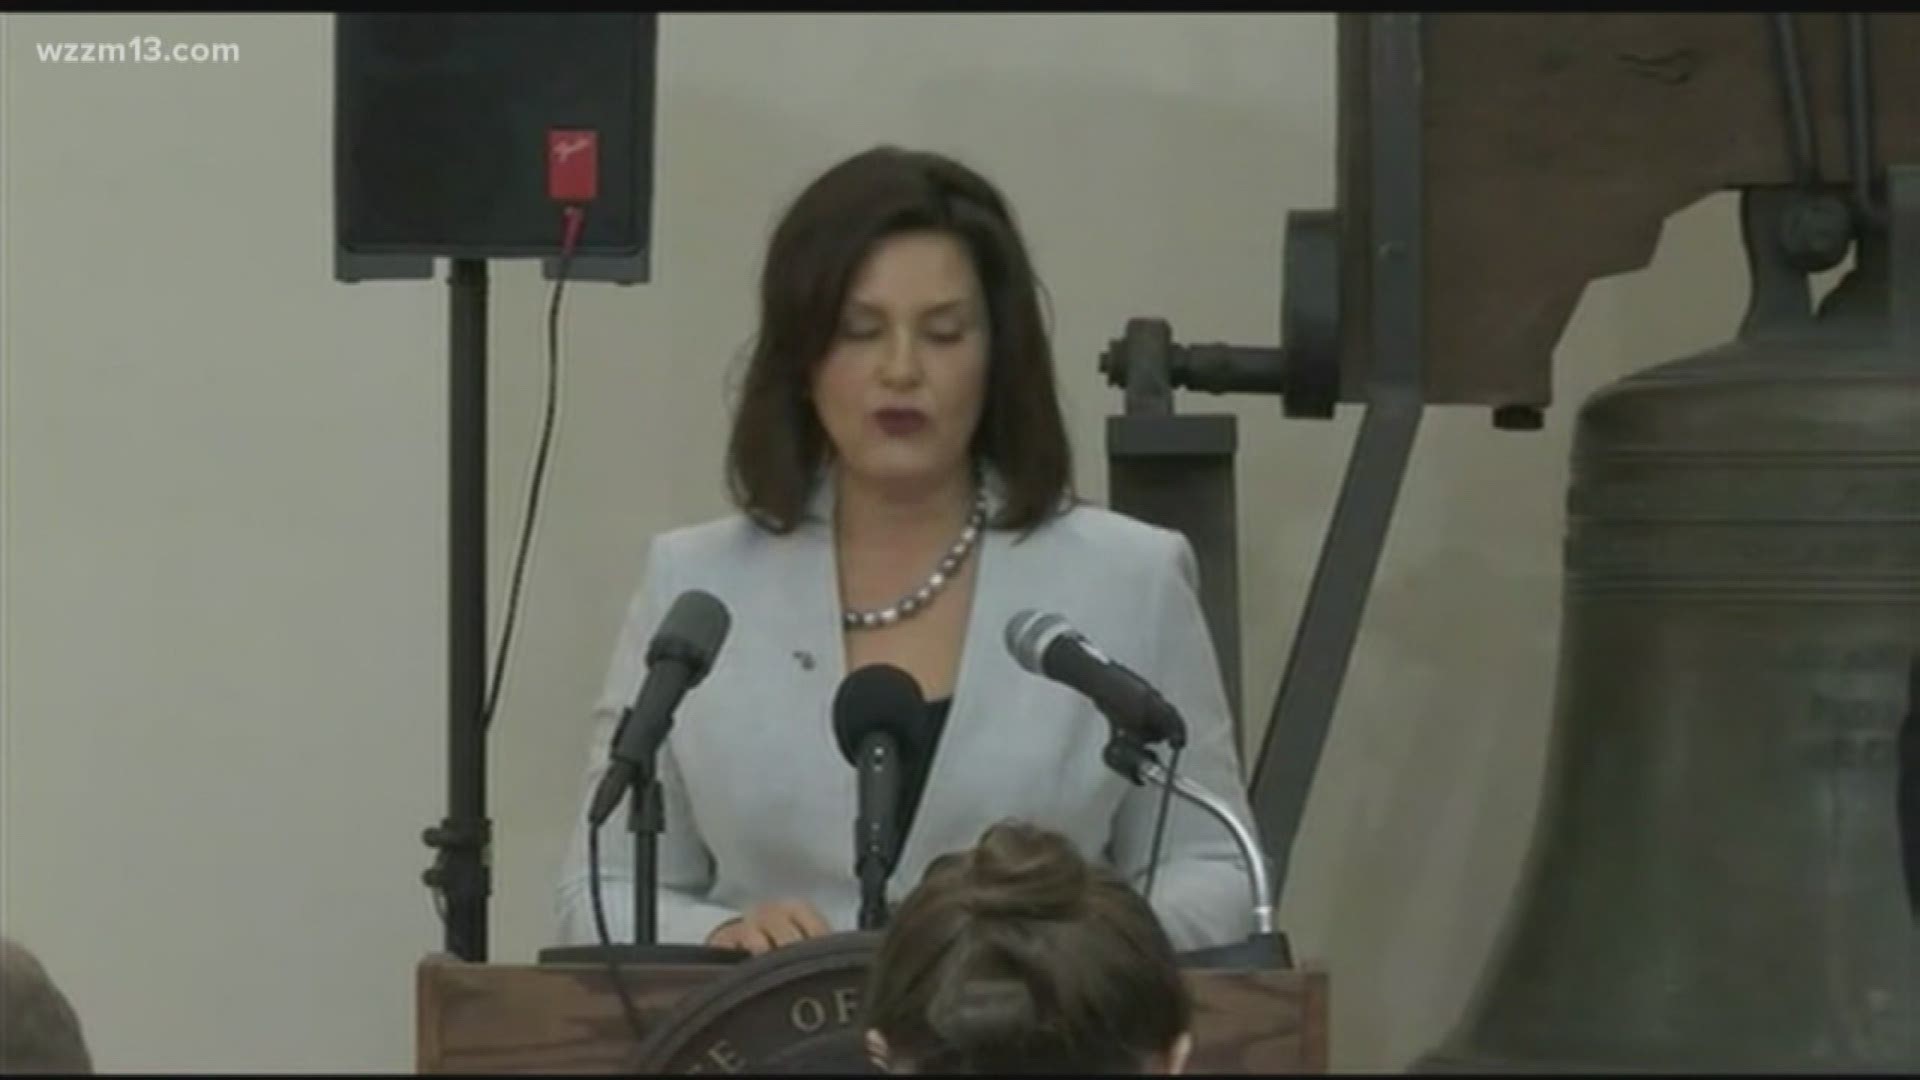 Whitmer announces changes to Department of Environmental Quality